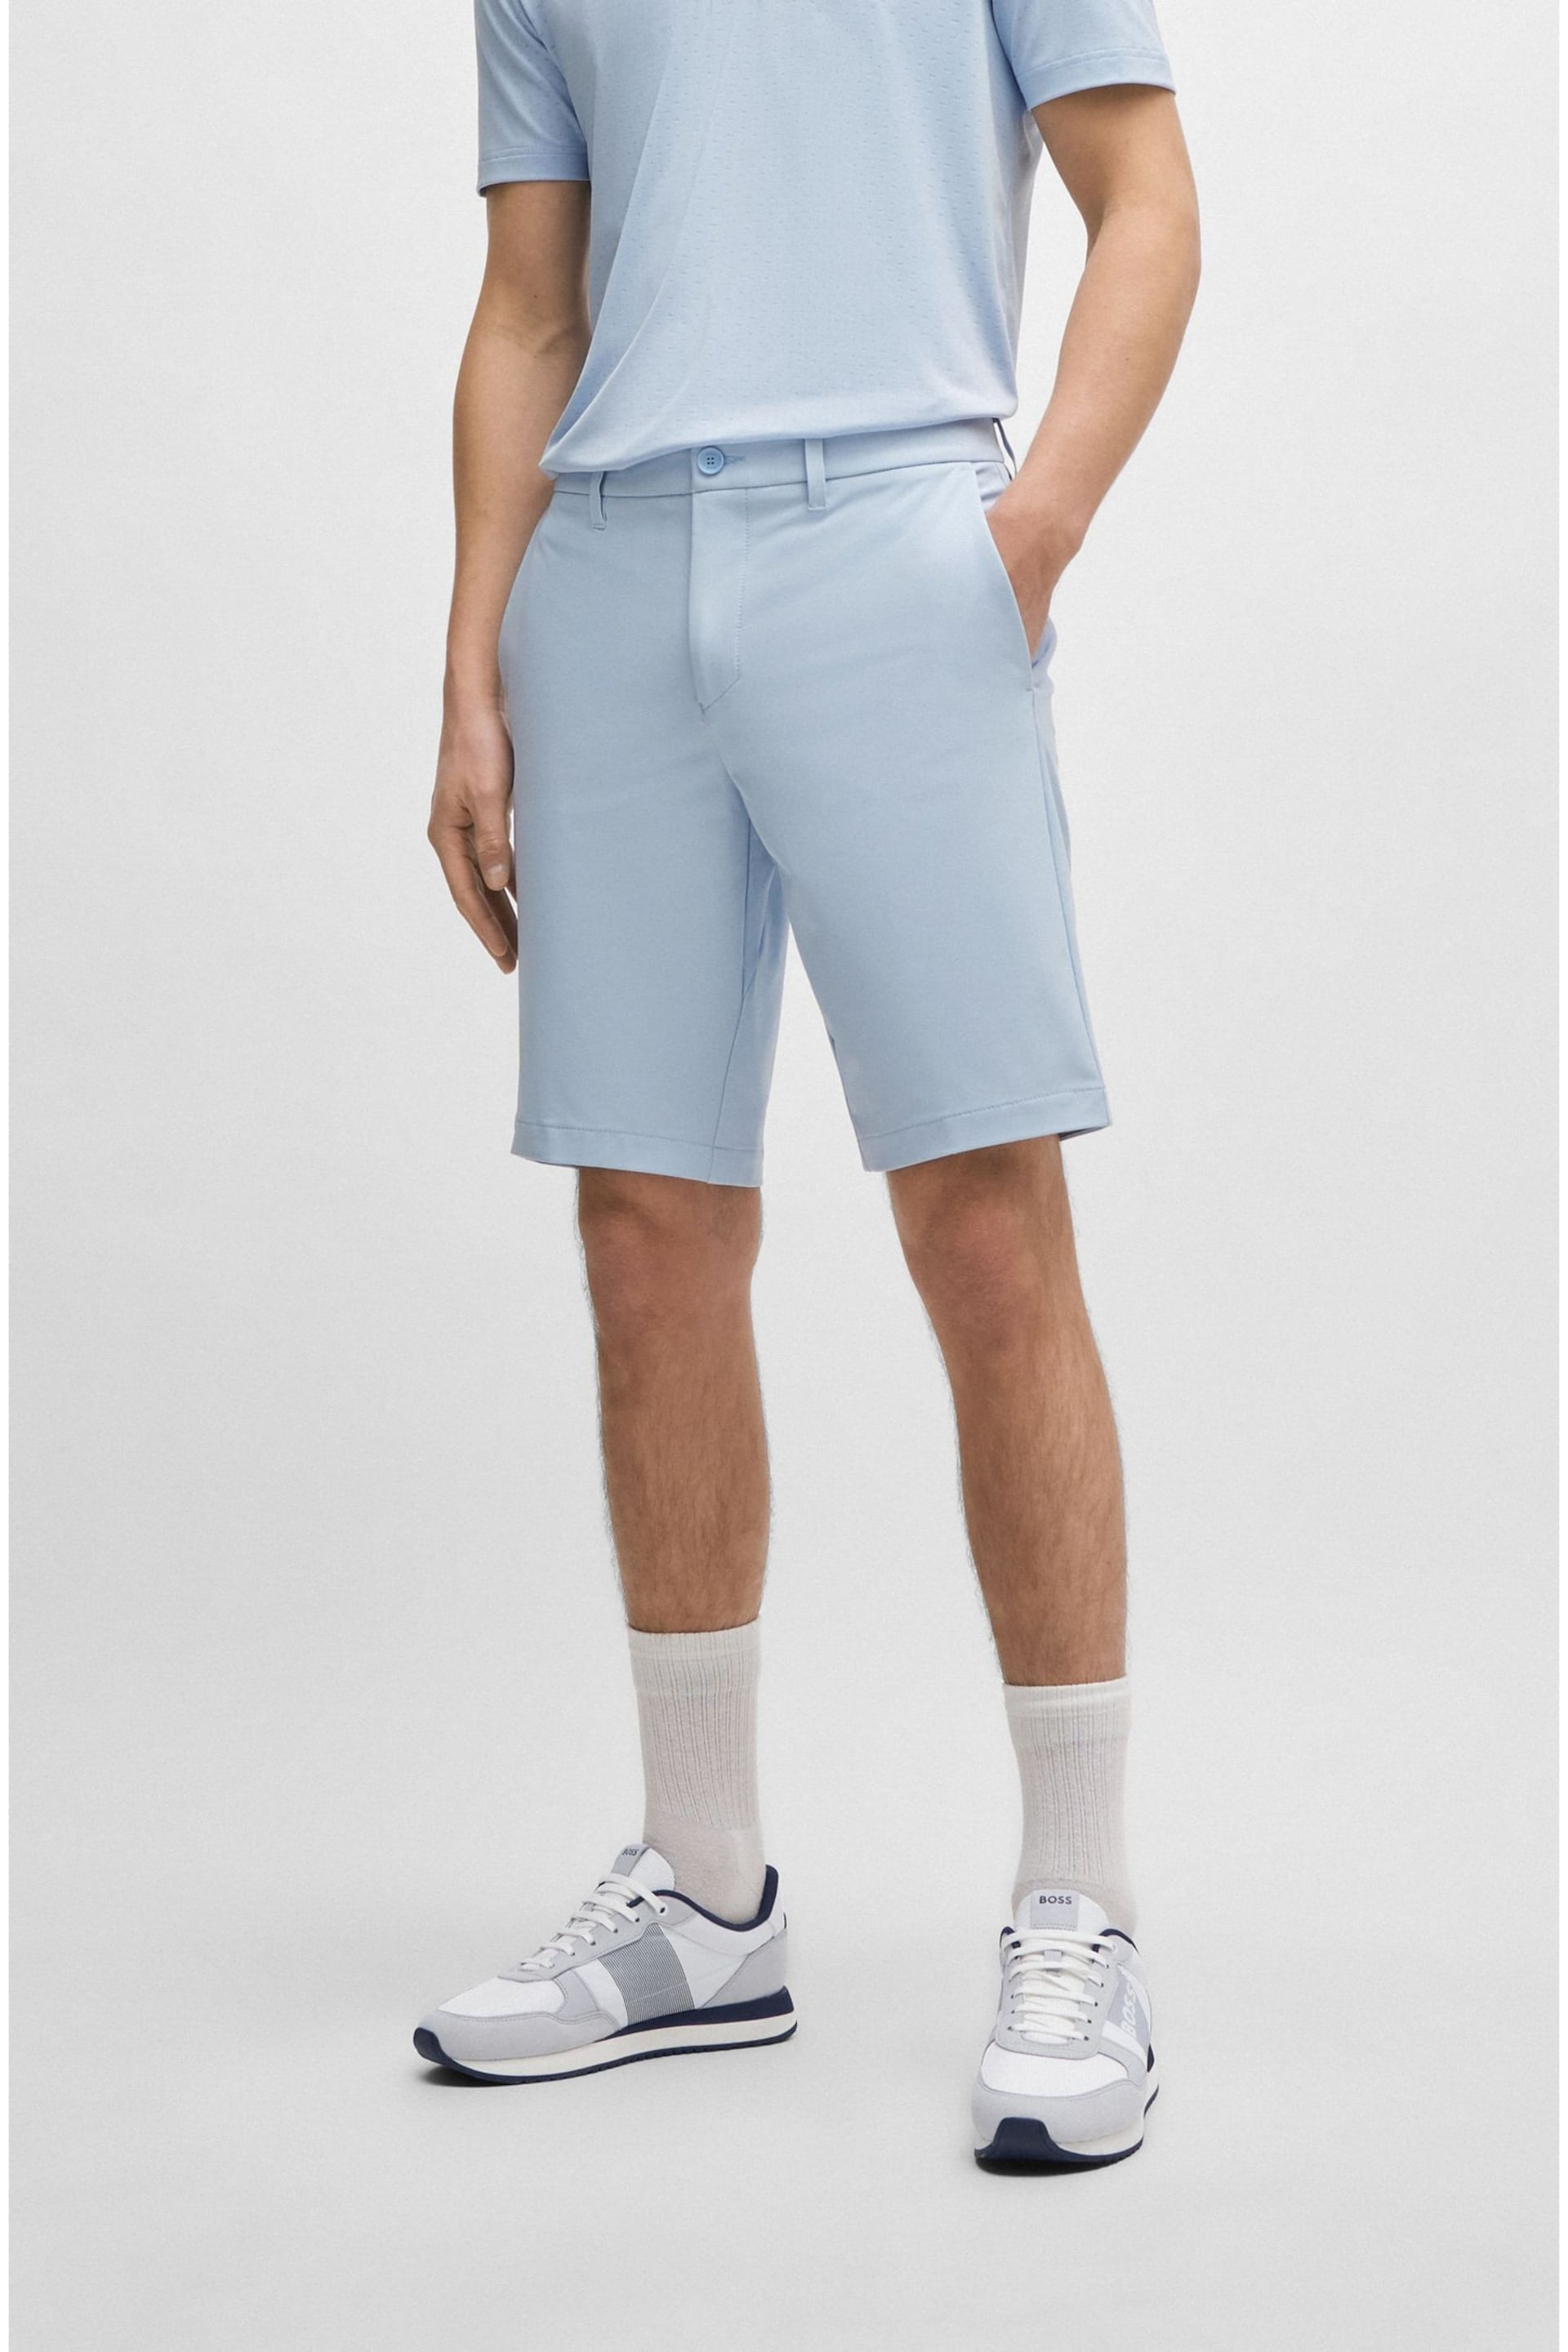 BOSS Light Blue Slim Fit Shorts in Water Repellent Easy Iron Fabric - Image 1 of 5